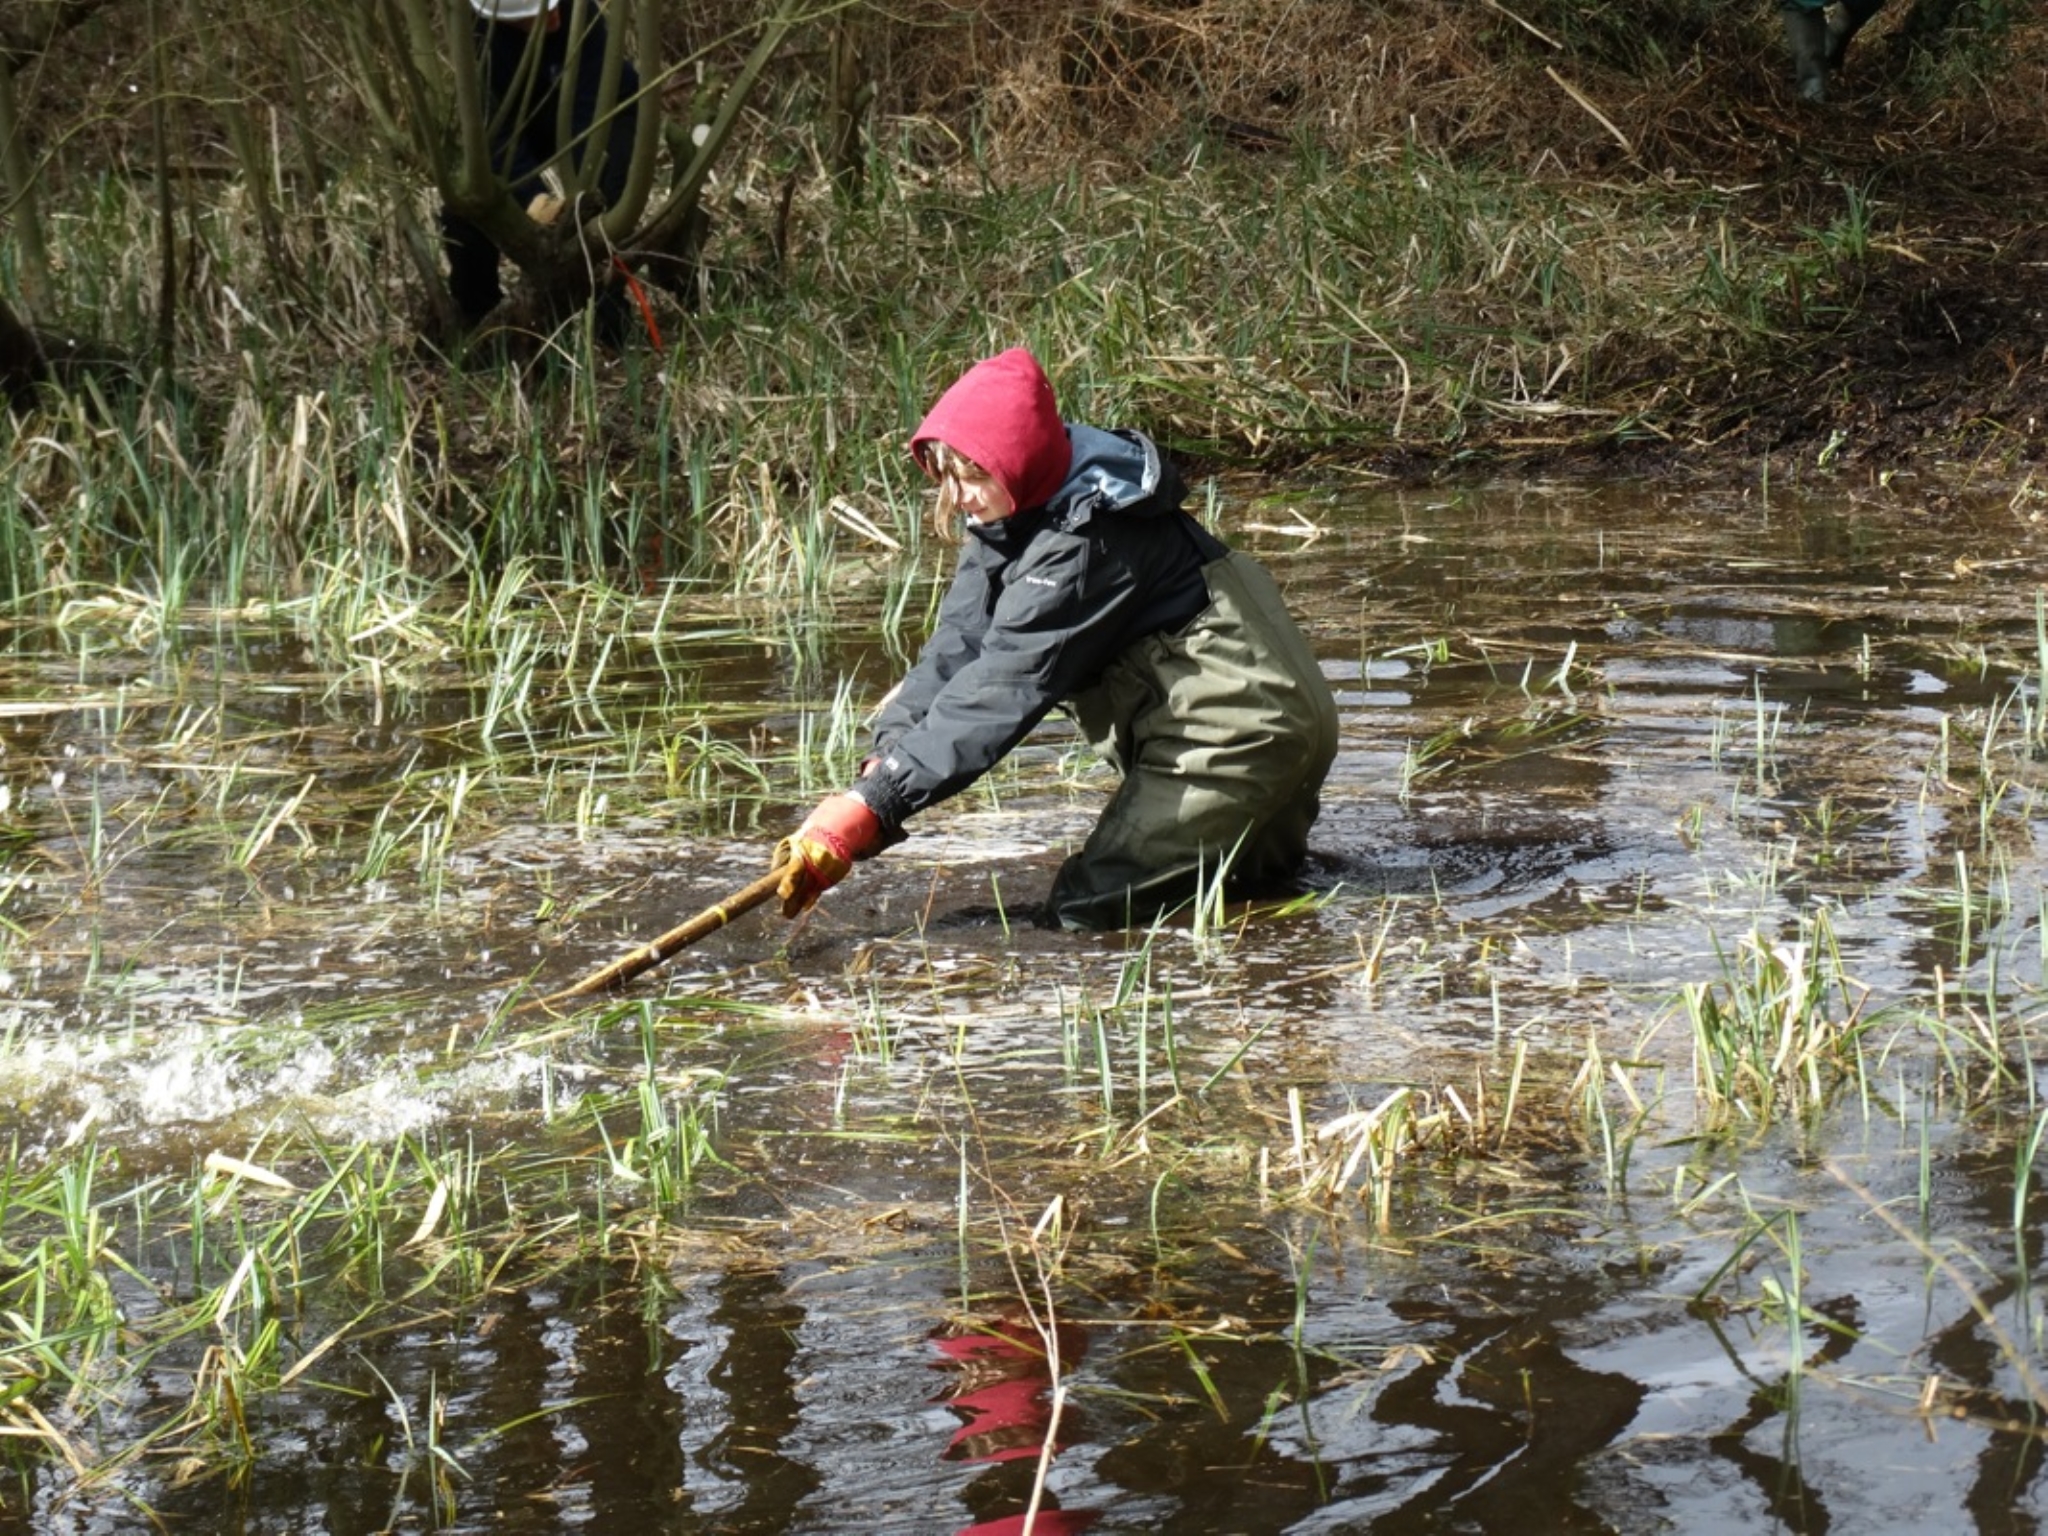 A photo from the FoTF Conservation Event - March 2019 - Clearance work around, and in, the ponds at Harling Woods, Harling : A volunteer clears weeds from one of the ponds